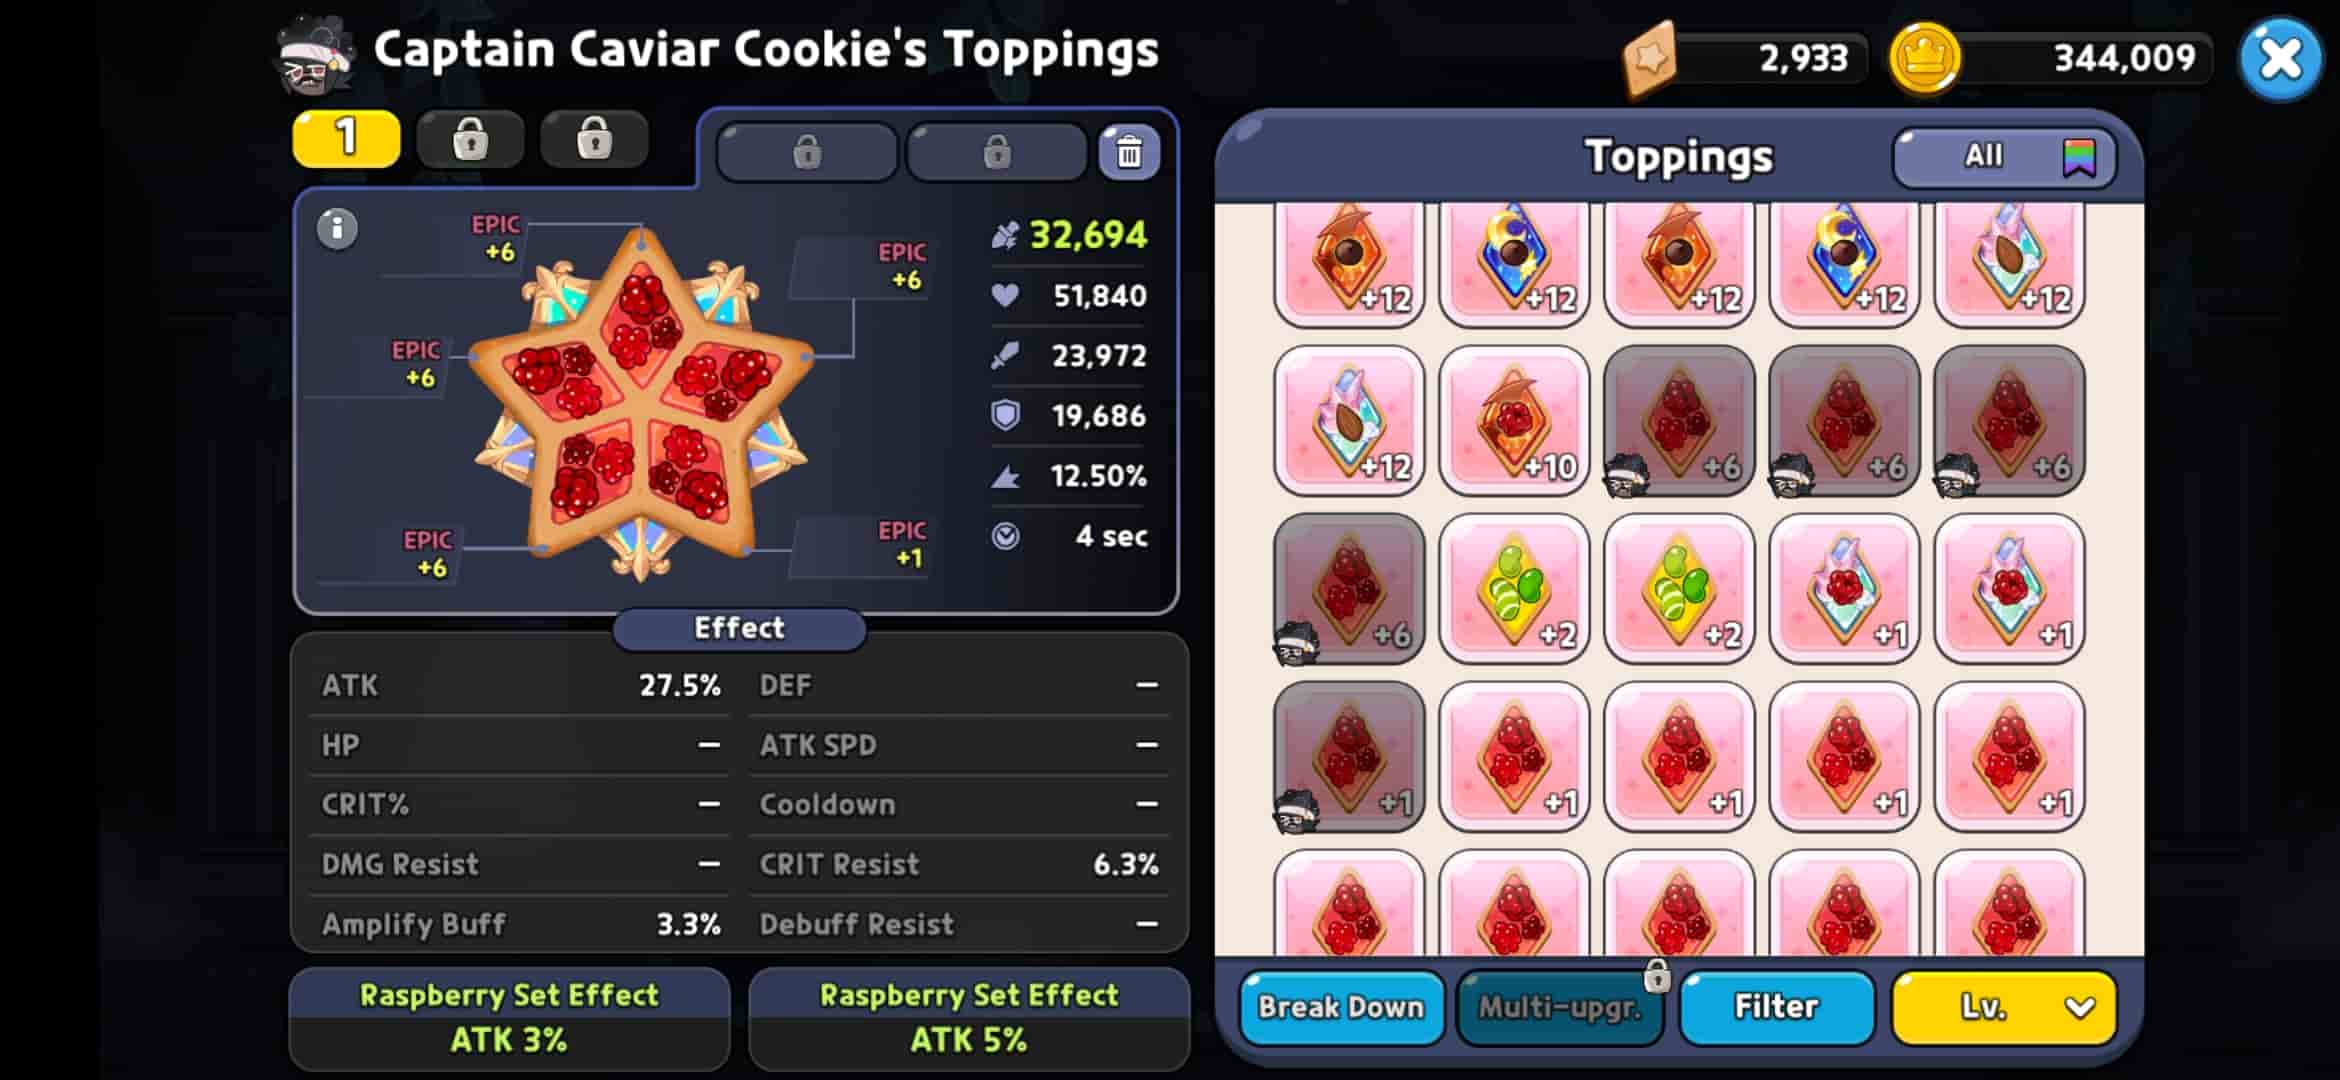 Captain Caviar Cookie toppings